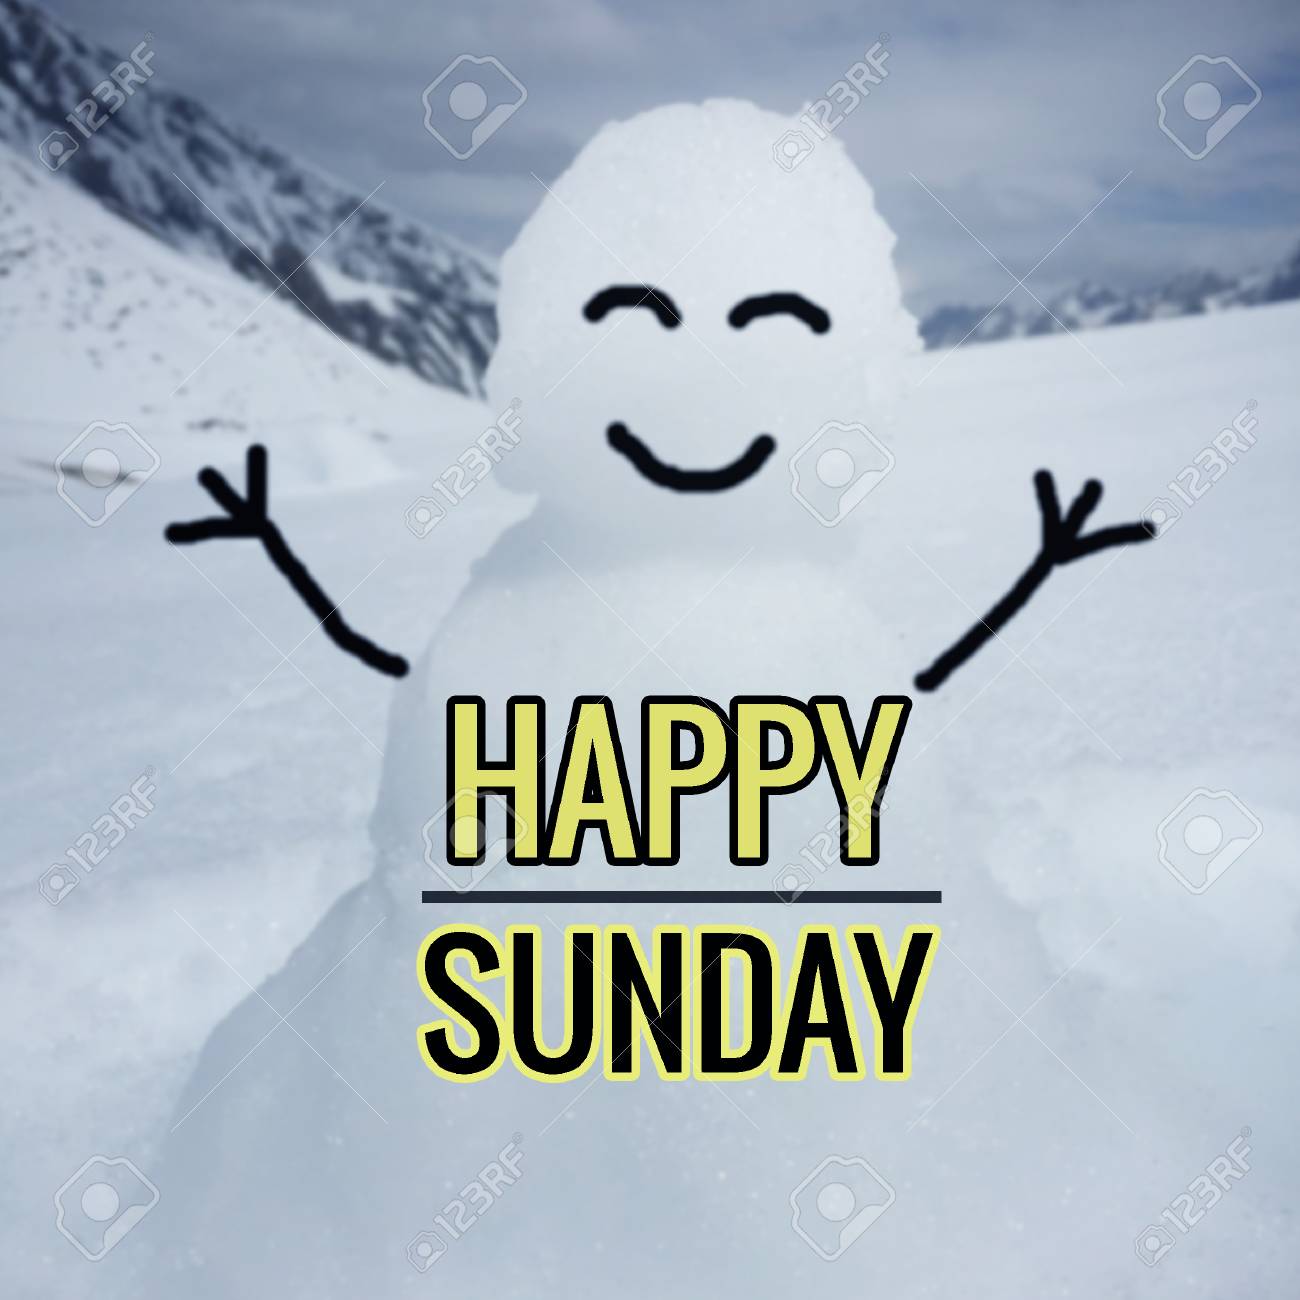 74694390-word-happy-sunday-with-smiling-snowman-blurred-background.jpg